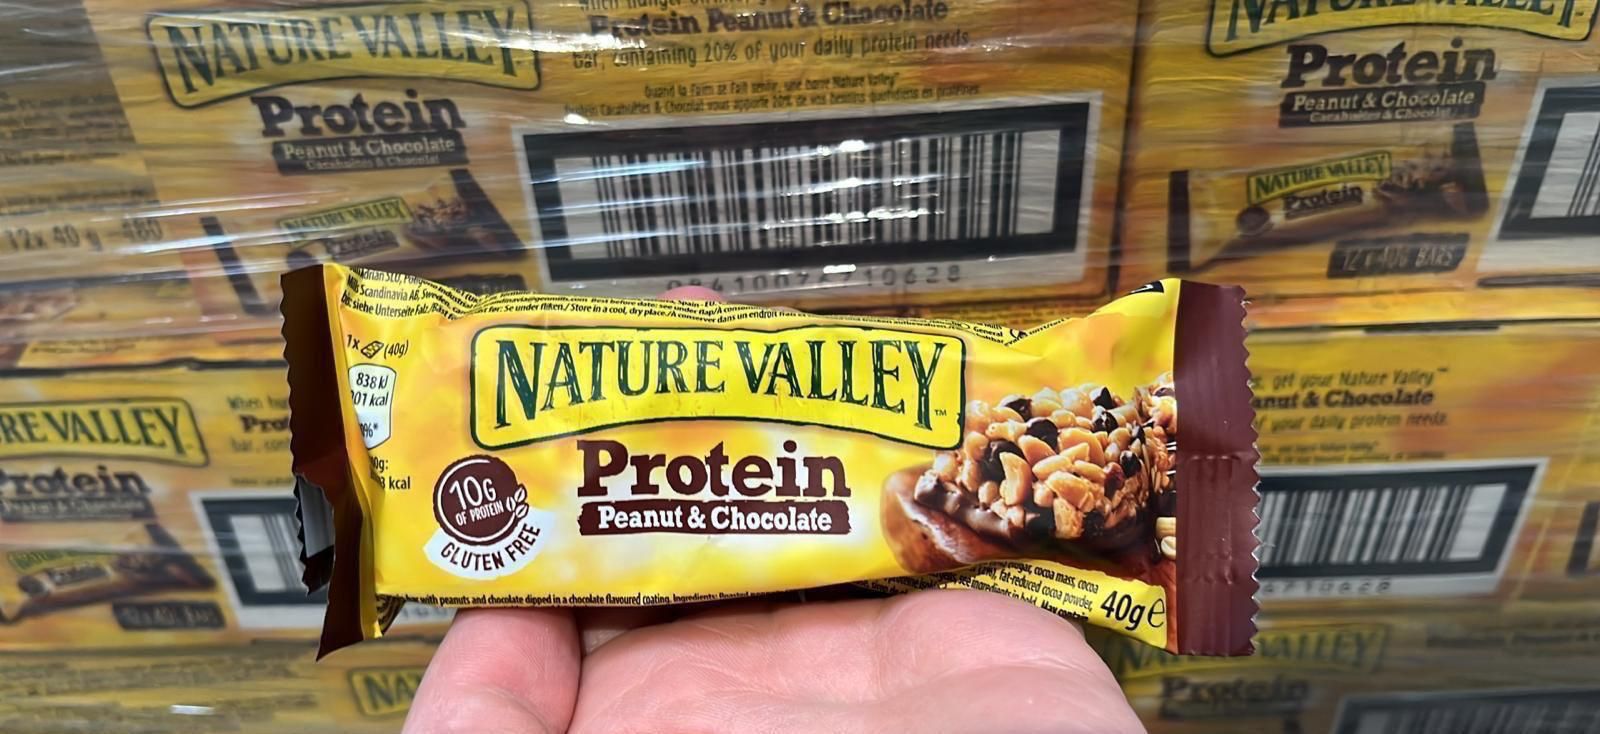 ⭐️REDUCED PRICE⭐️ Nature valley protein peanut butter & choco 12x40g  BBE 05/24 